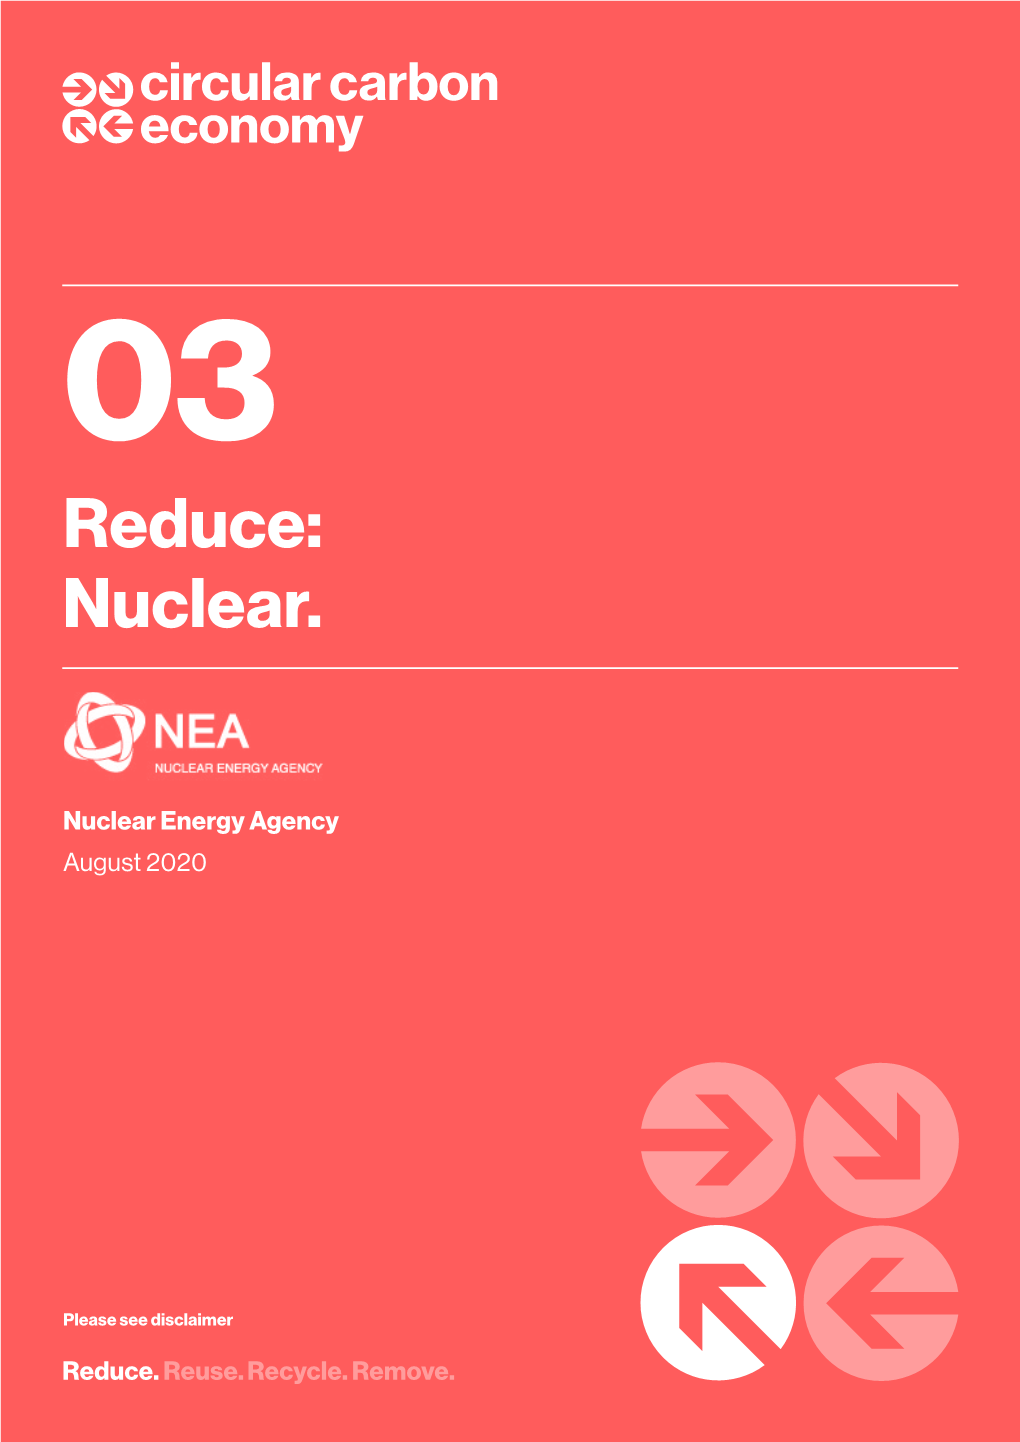 Nuclear. Reduce